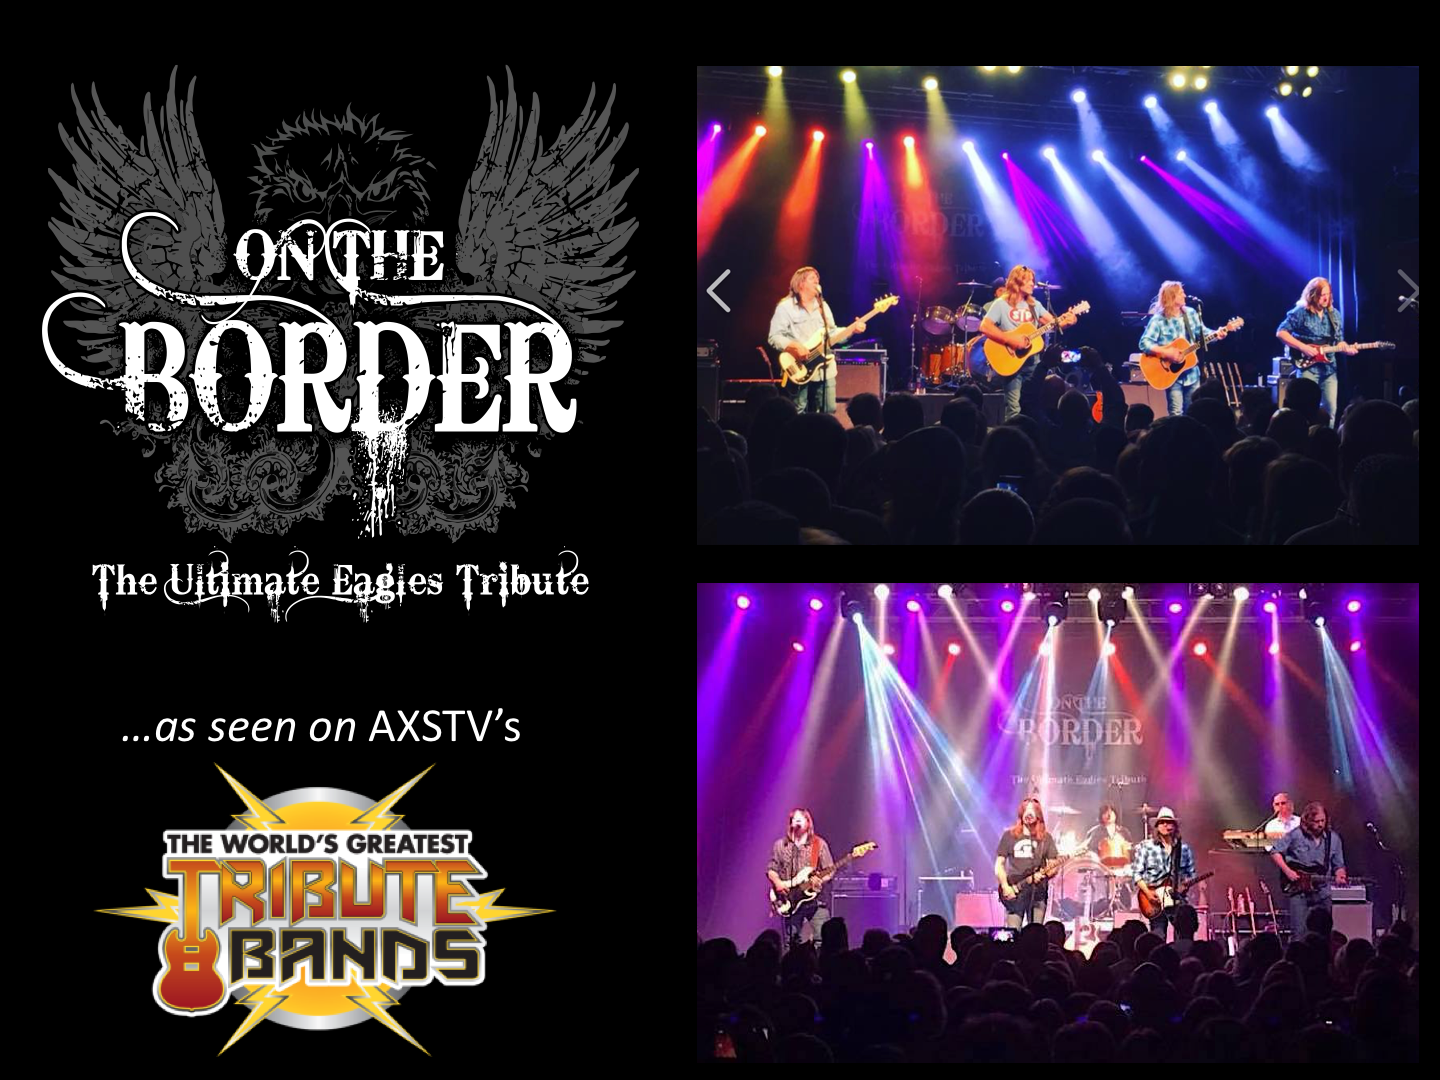 on the border eagles tribute band tour dates